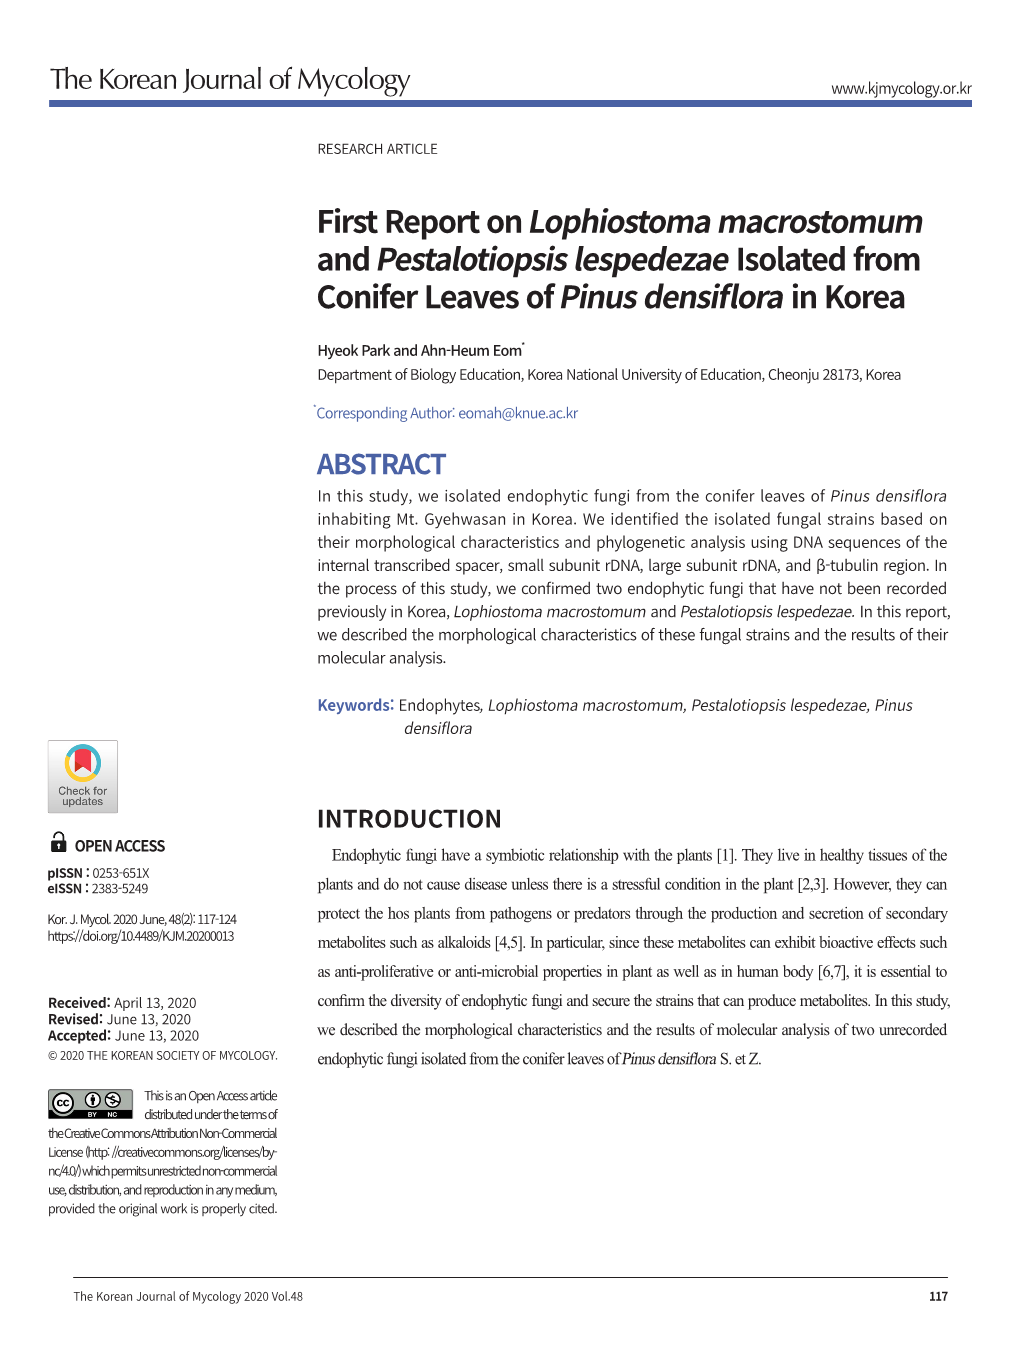 First Report on Lophiostoma Macrostomum and Pestalotiopsis Lespedezae Isolated from Conifer Leaves of Pinus Densiflora in Korea